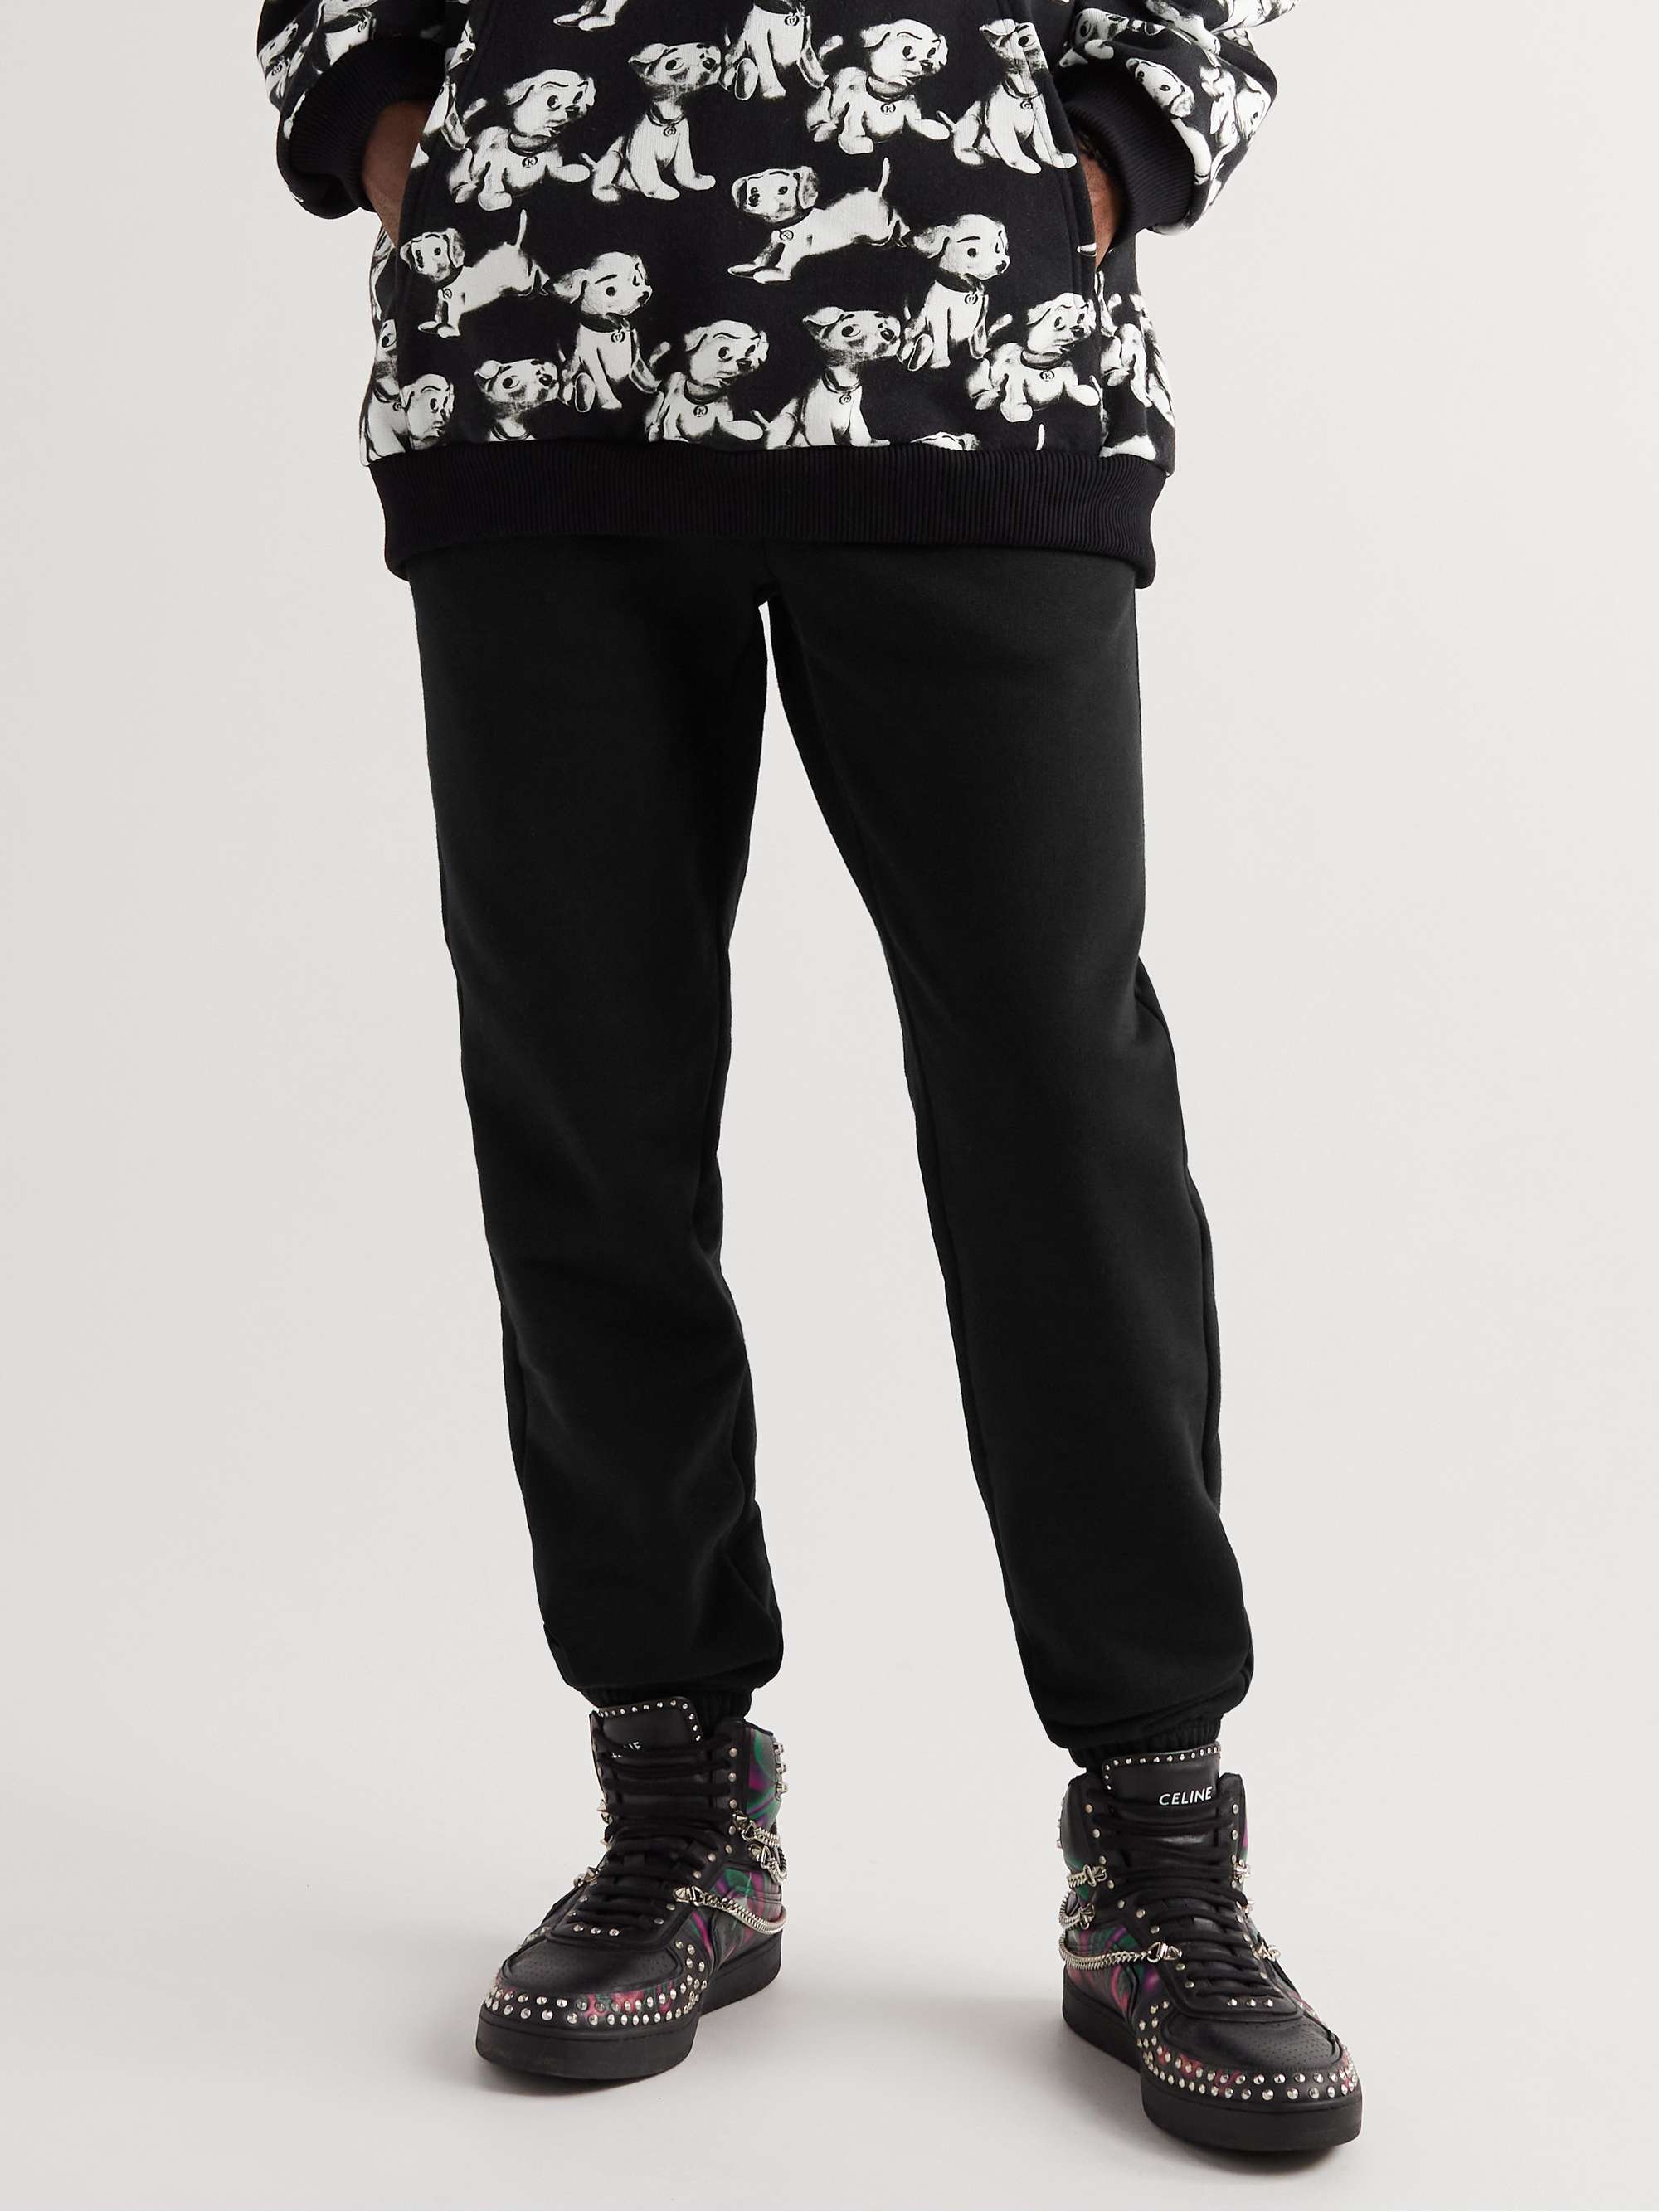 CELINE HOMME Tapered Logo-Embroidered Cotton-Jersey Sweatpants for